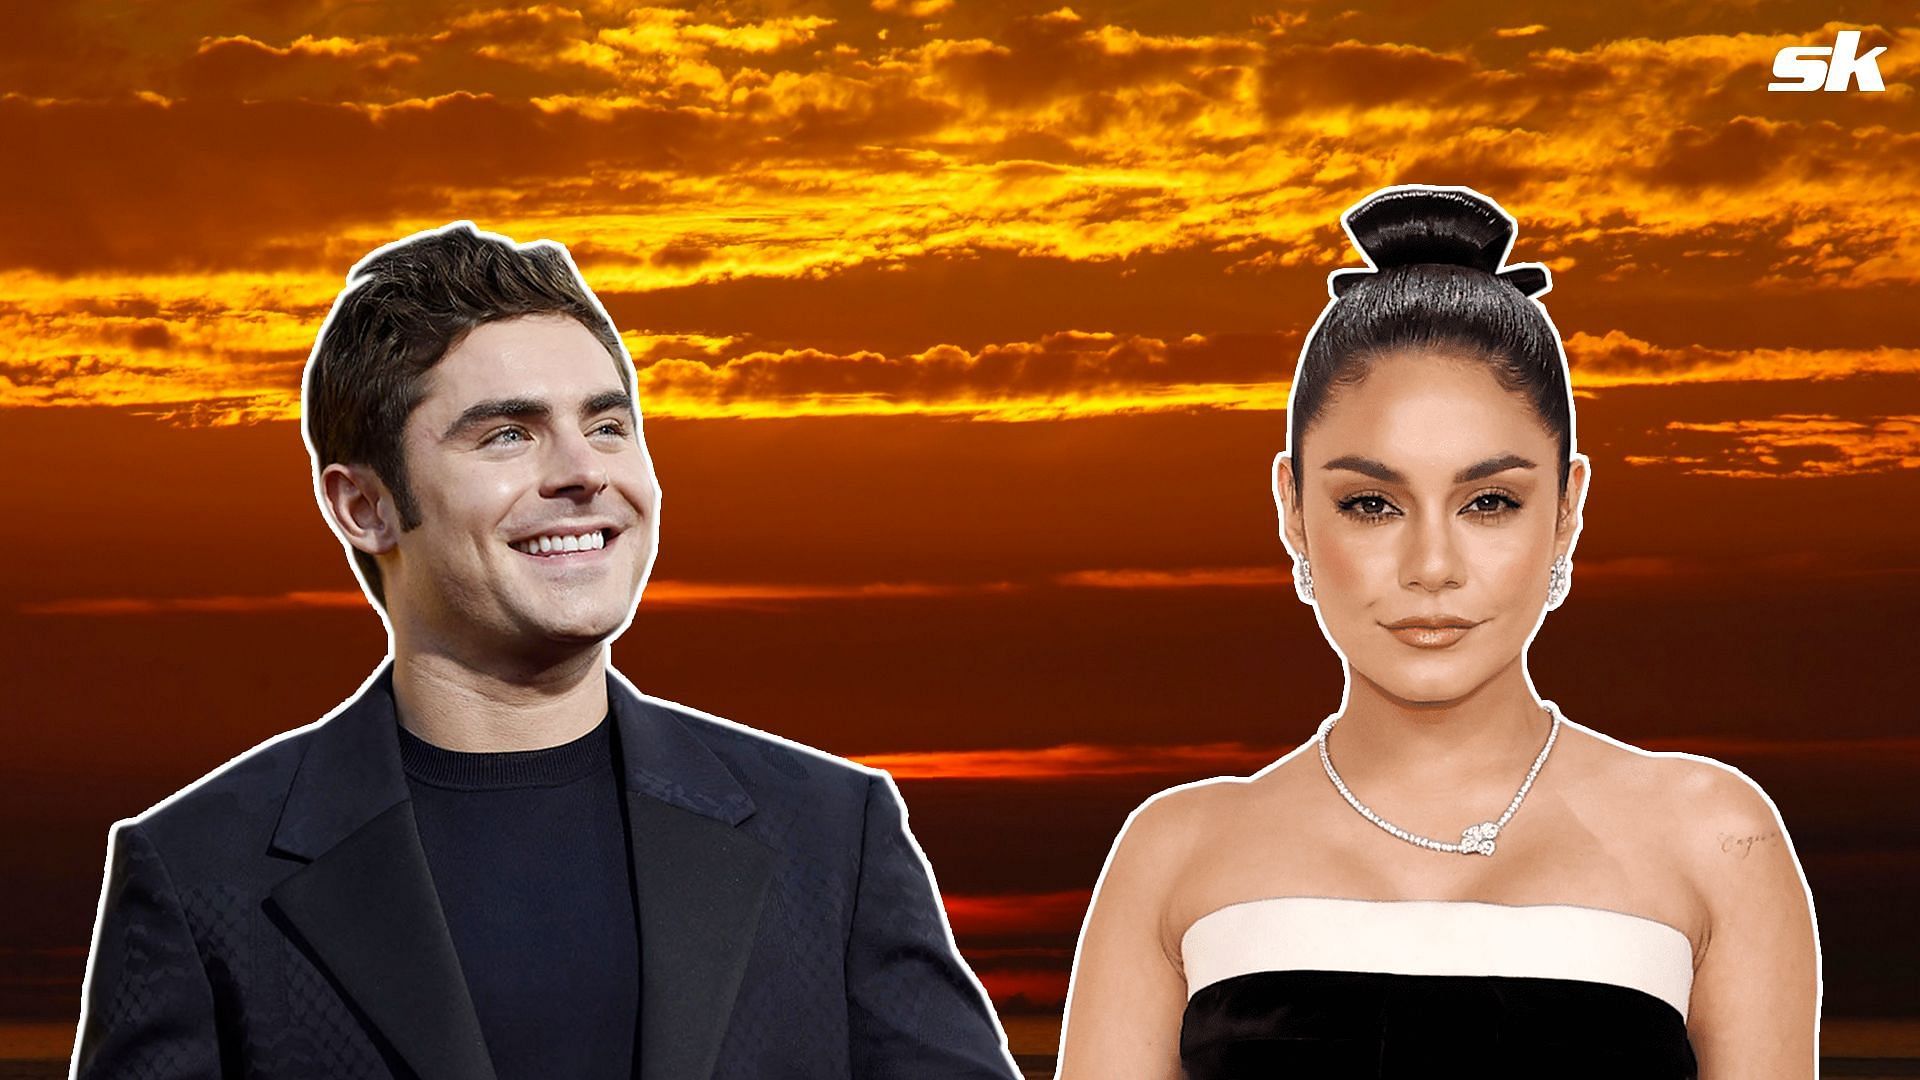 Vanessa Hudgens on-screen chemistry with Zac Efron quickly turned into something more real